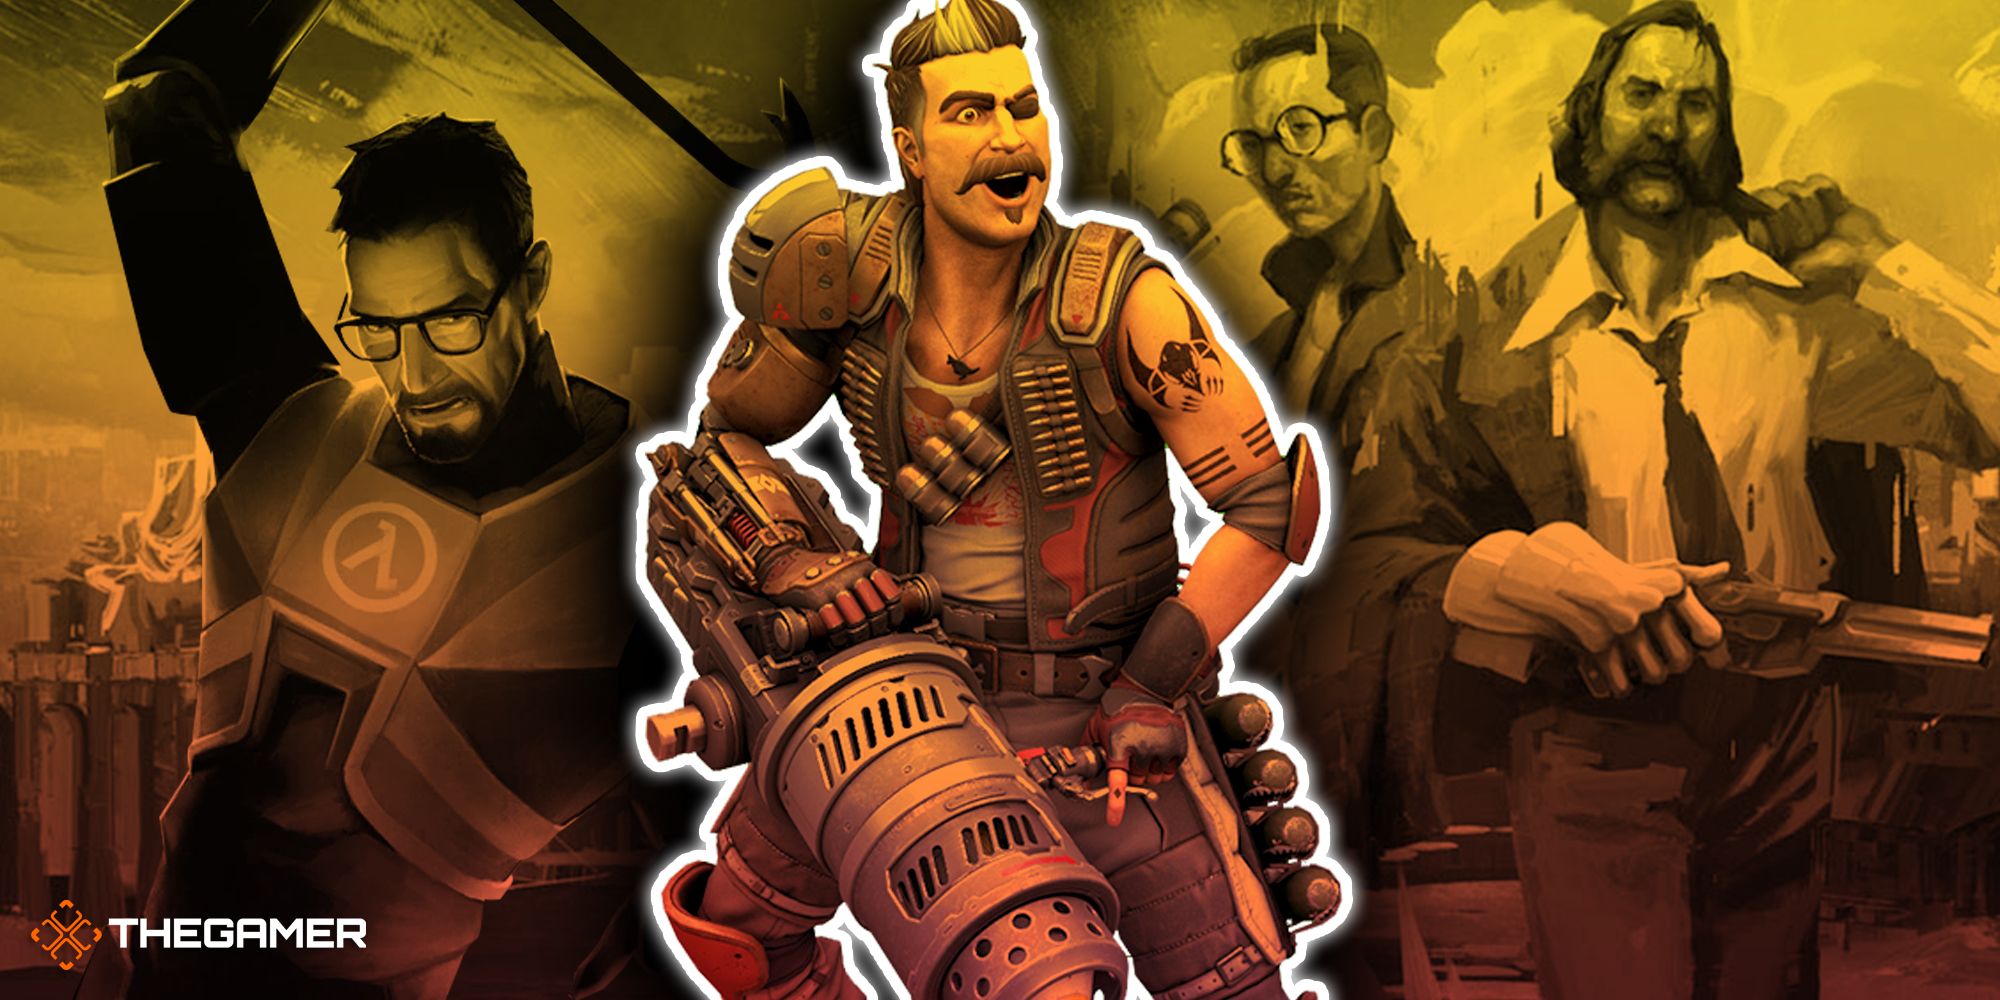 Game art from Apex Legends, Disco Elysium and Half-Life 2.